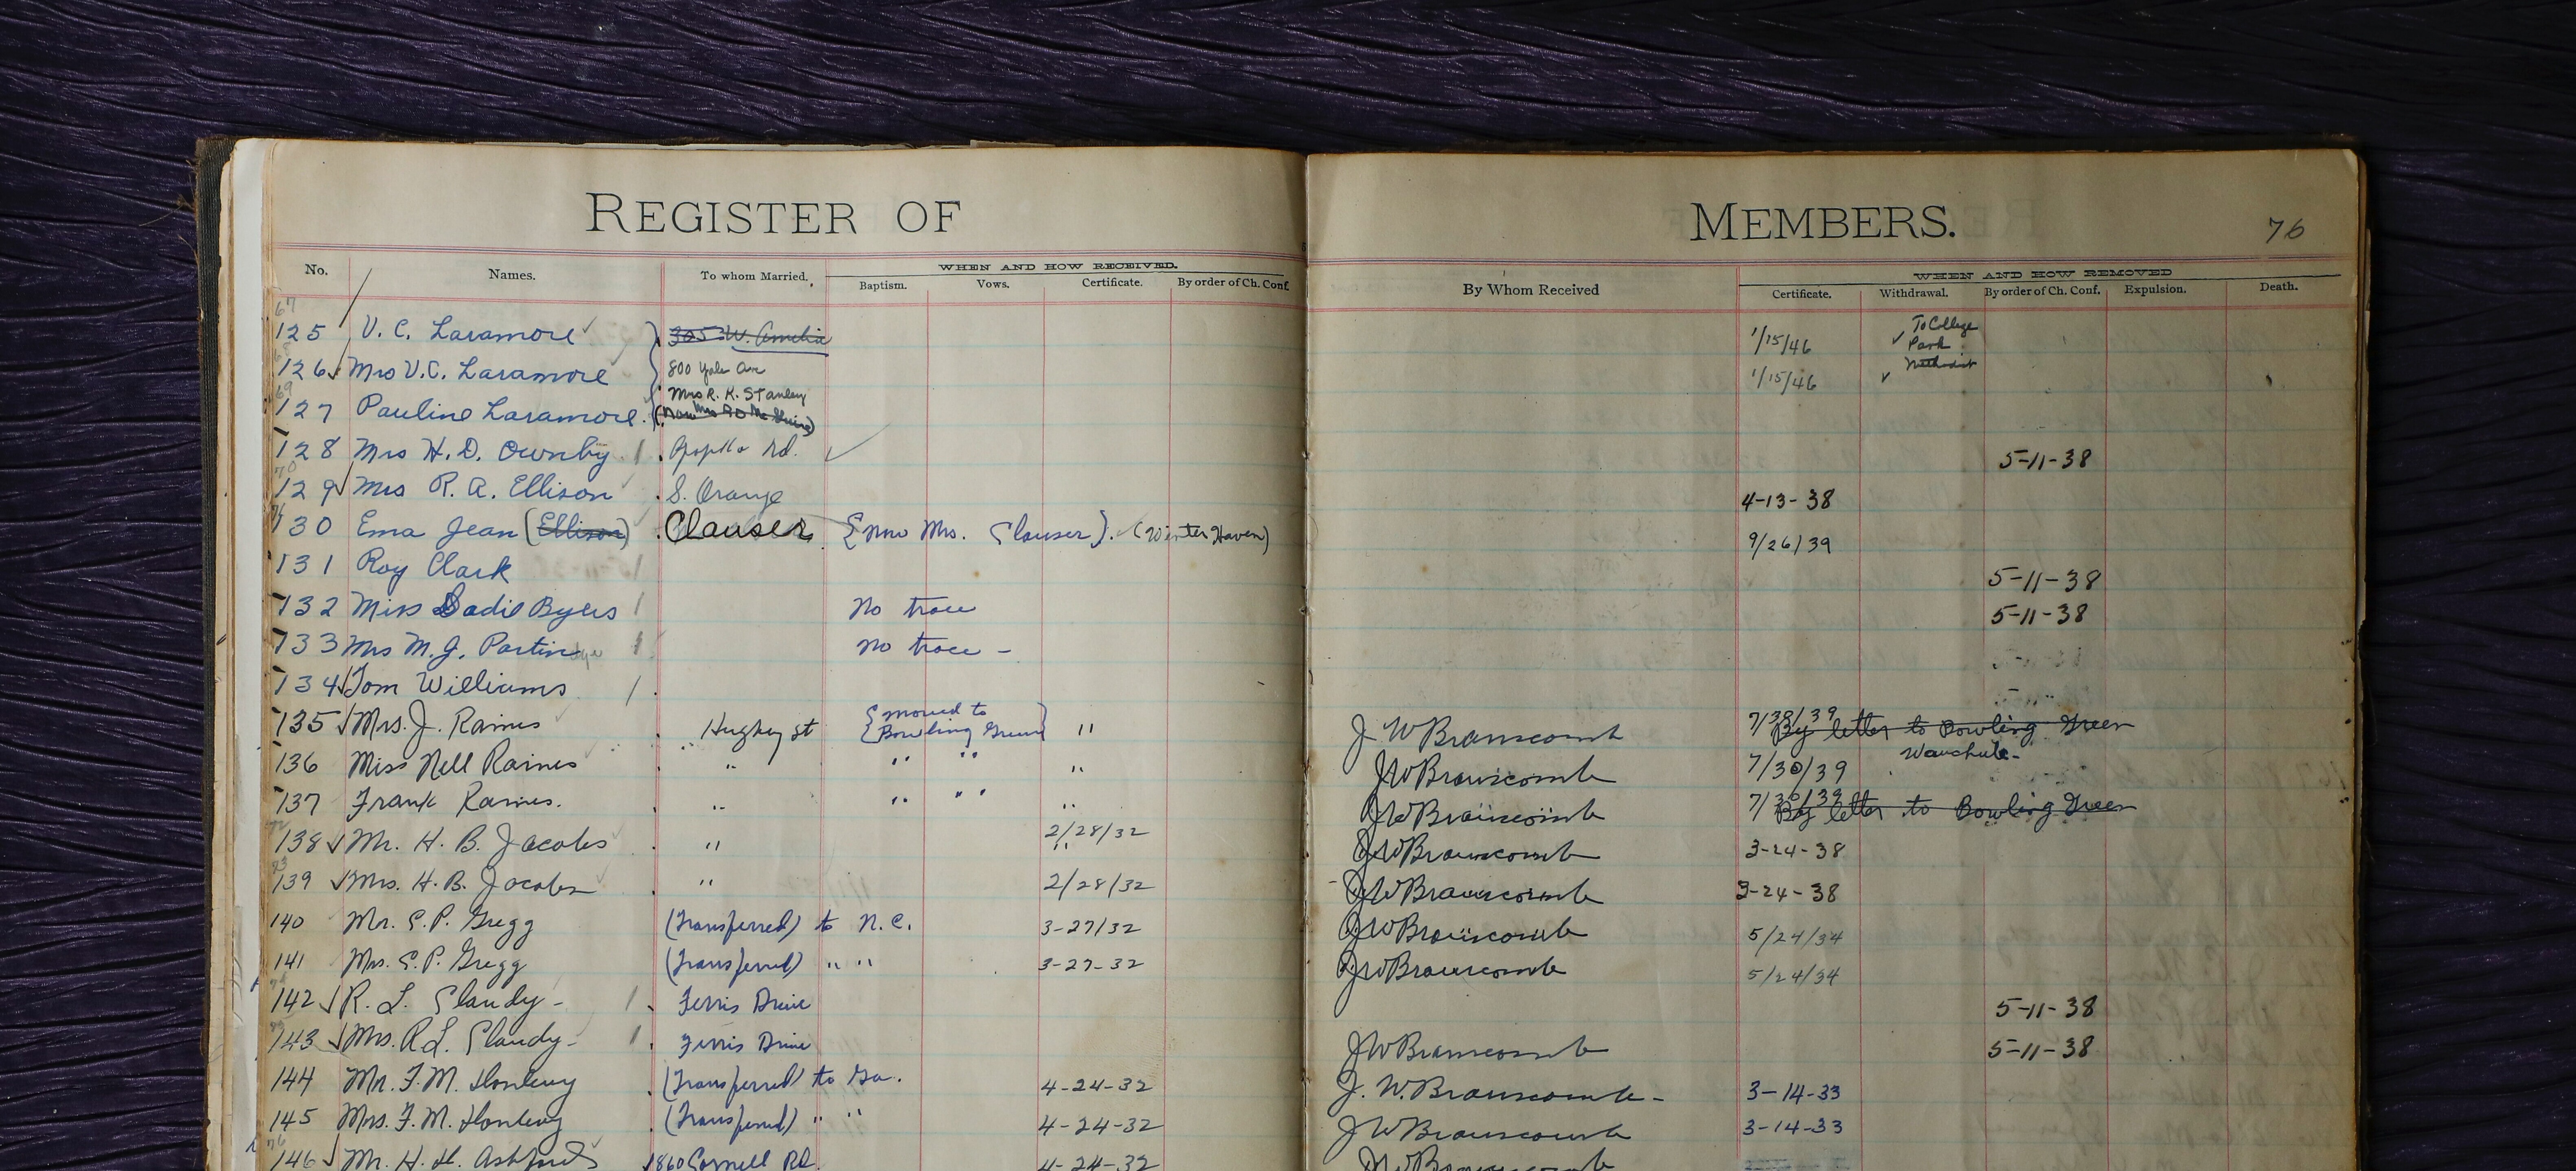 An image of an old member registration book